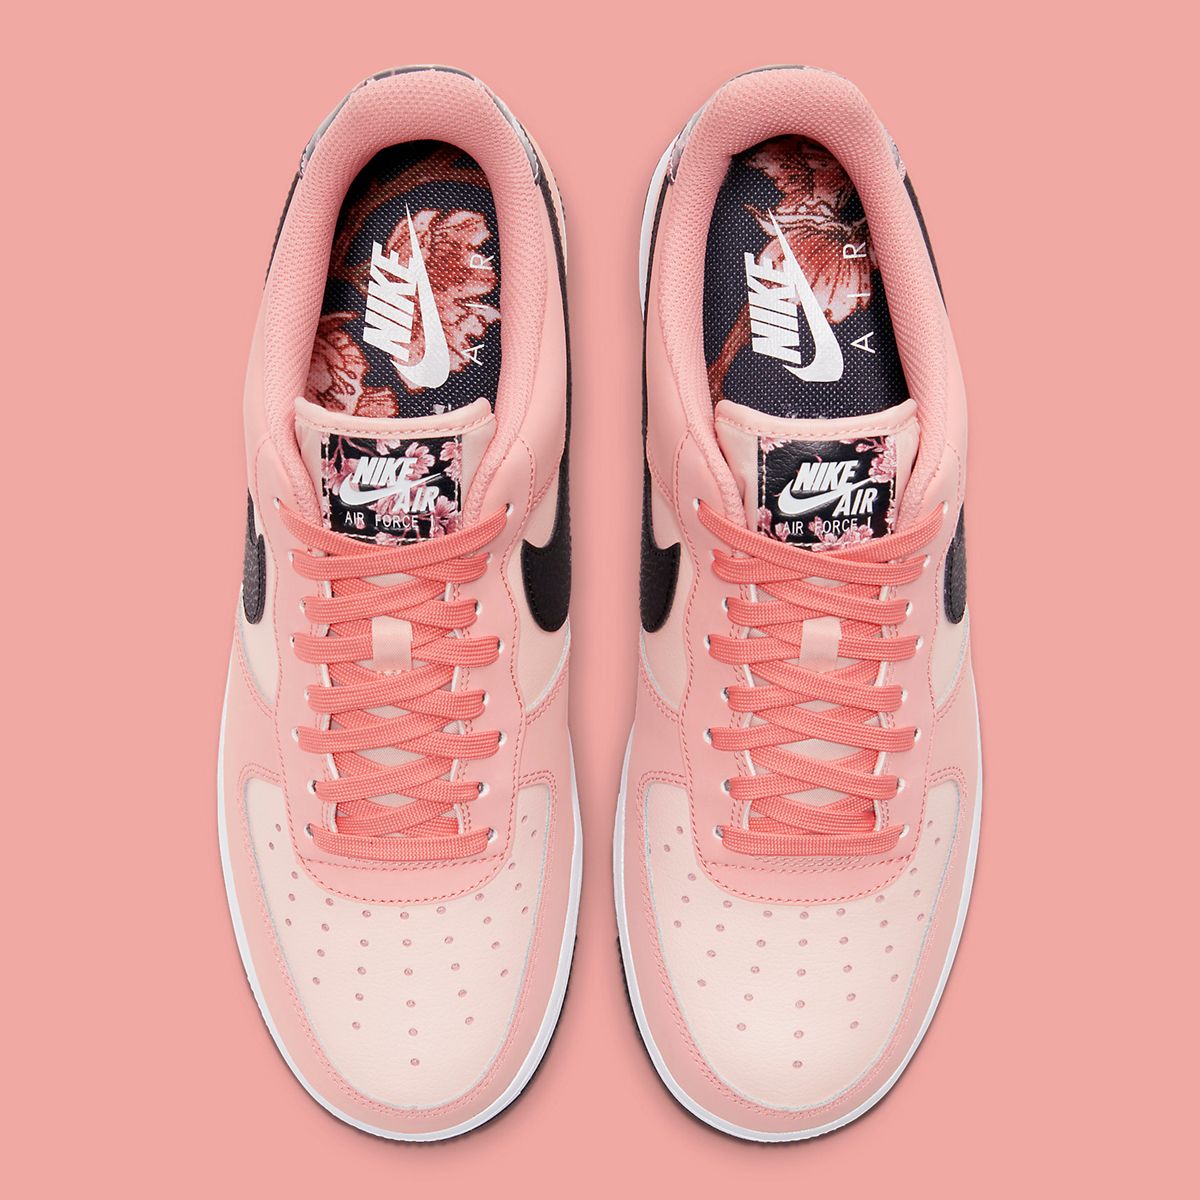 Nike's Air Force 1 Gets Popped With Cherry Blossom Prints | HOUSE OF HEAT